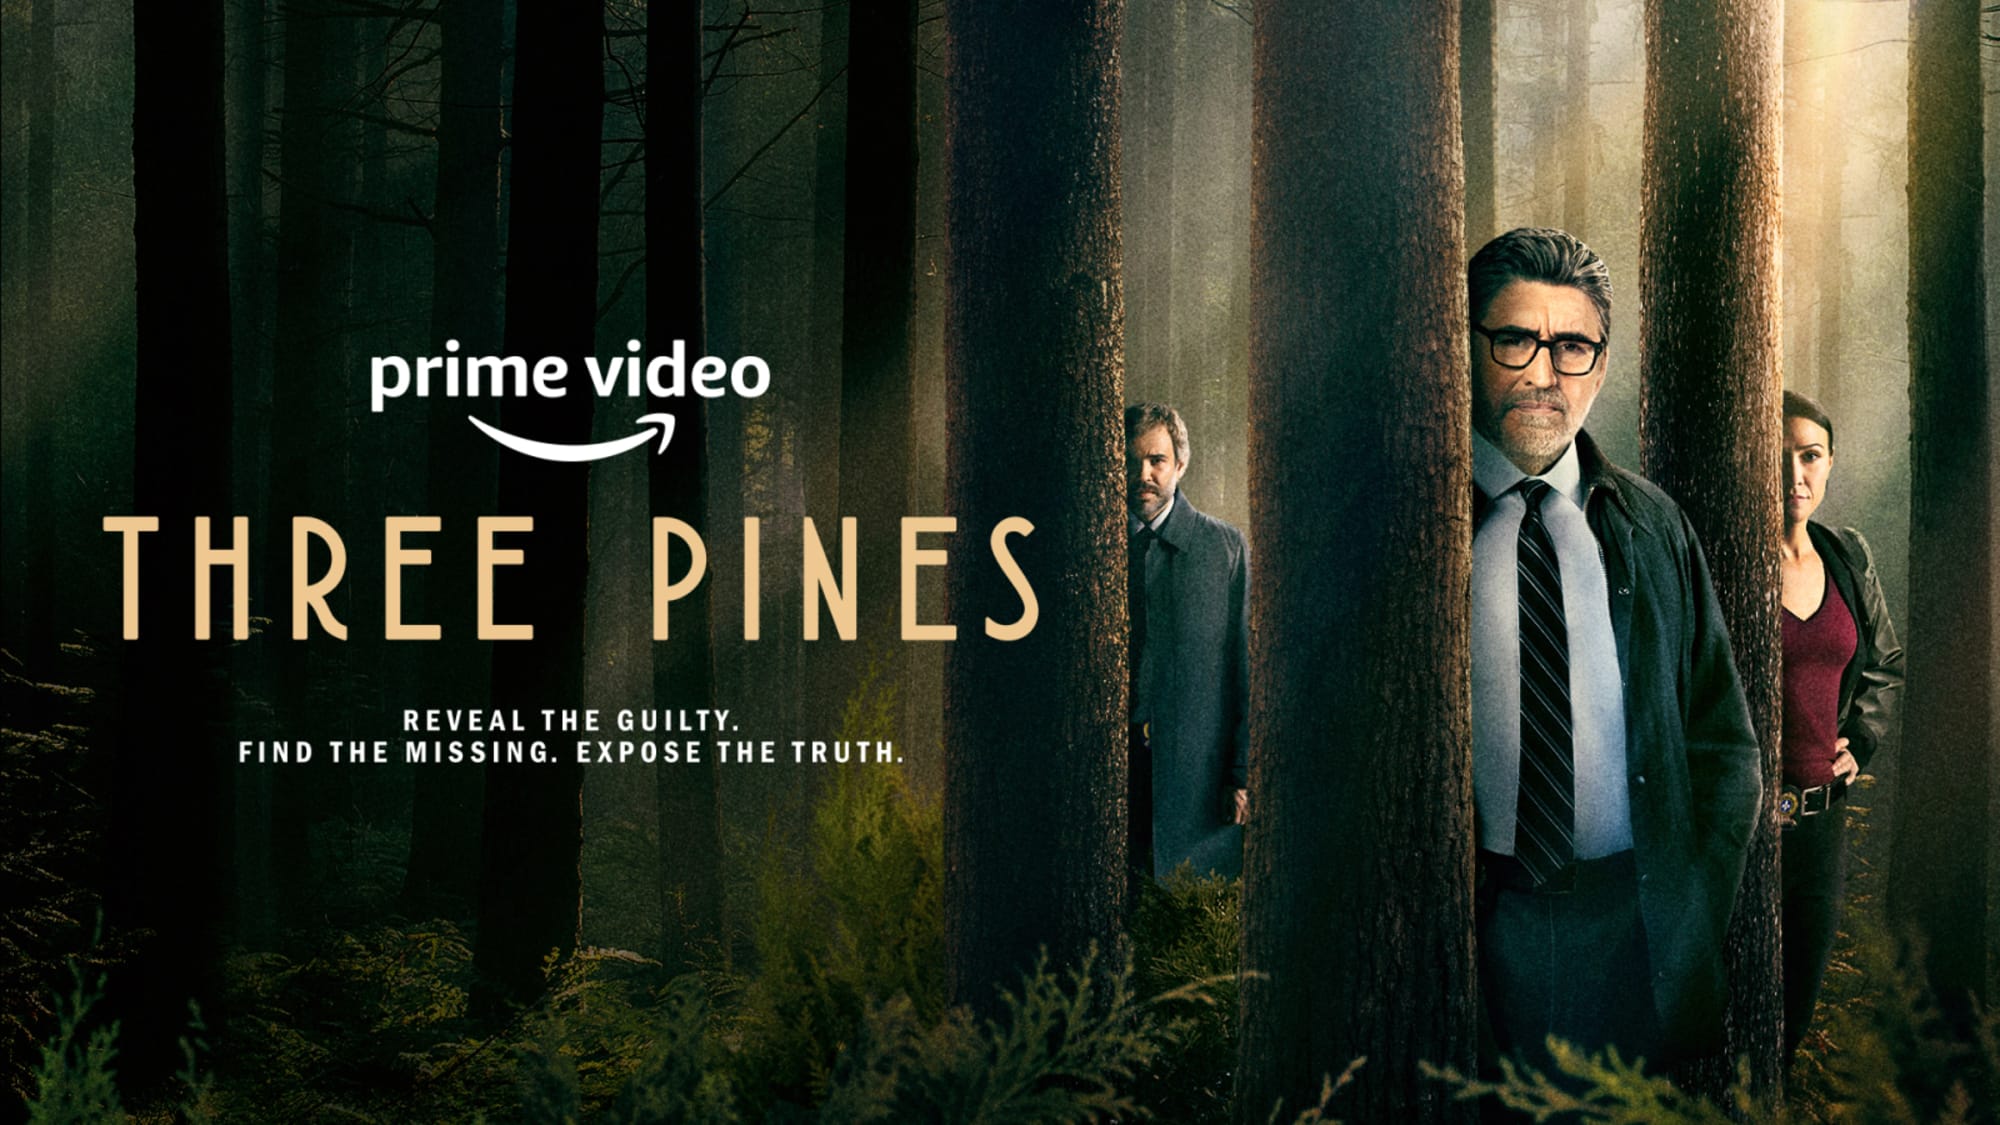 Three Pines Season 2 Cancelled On Prime Video - Will Series Find A New Home?